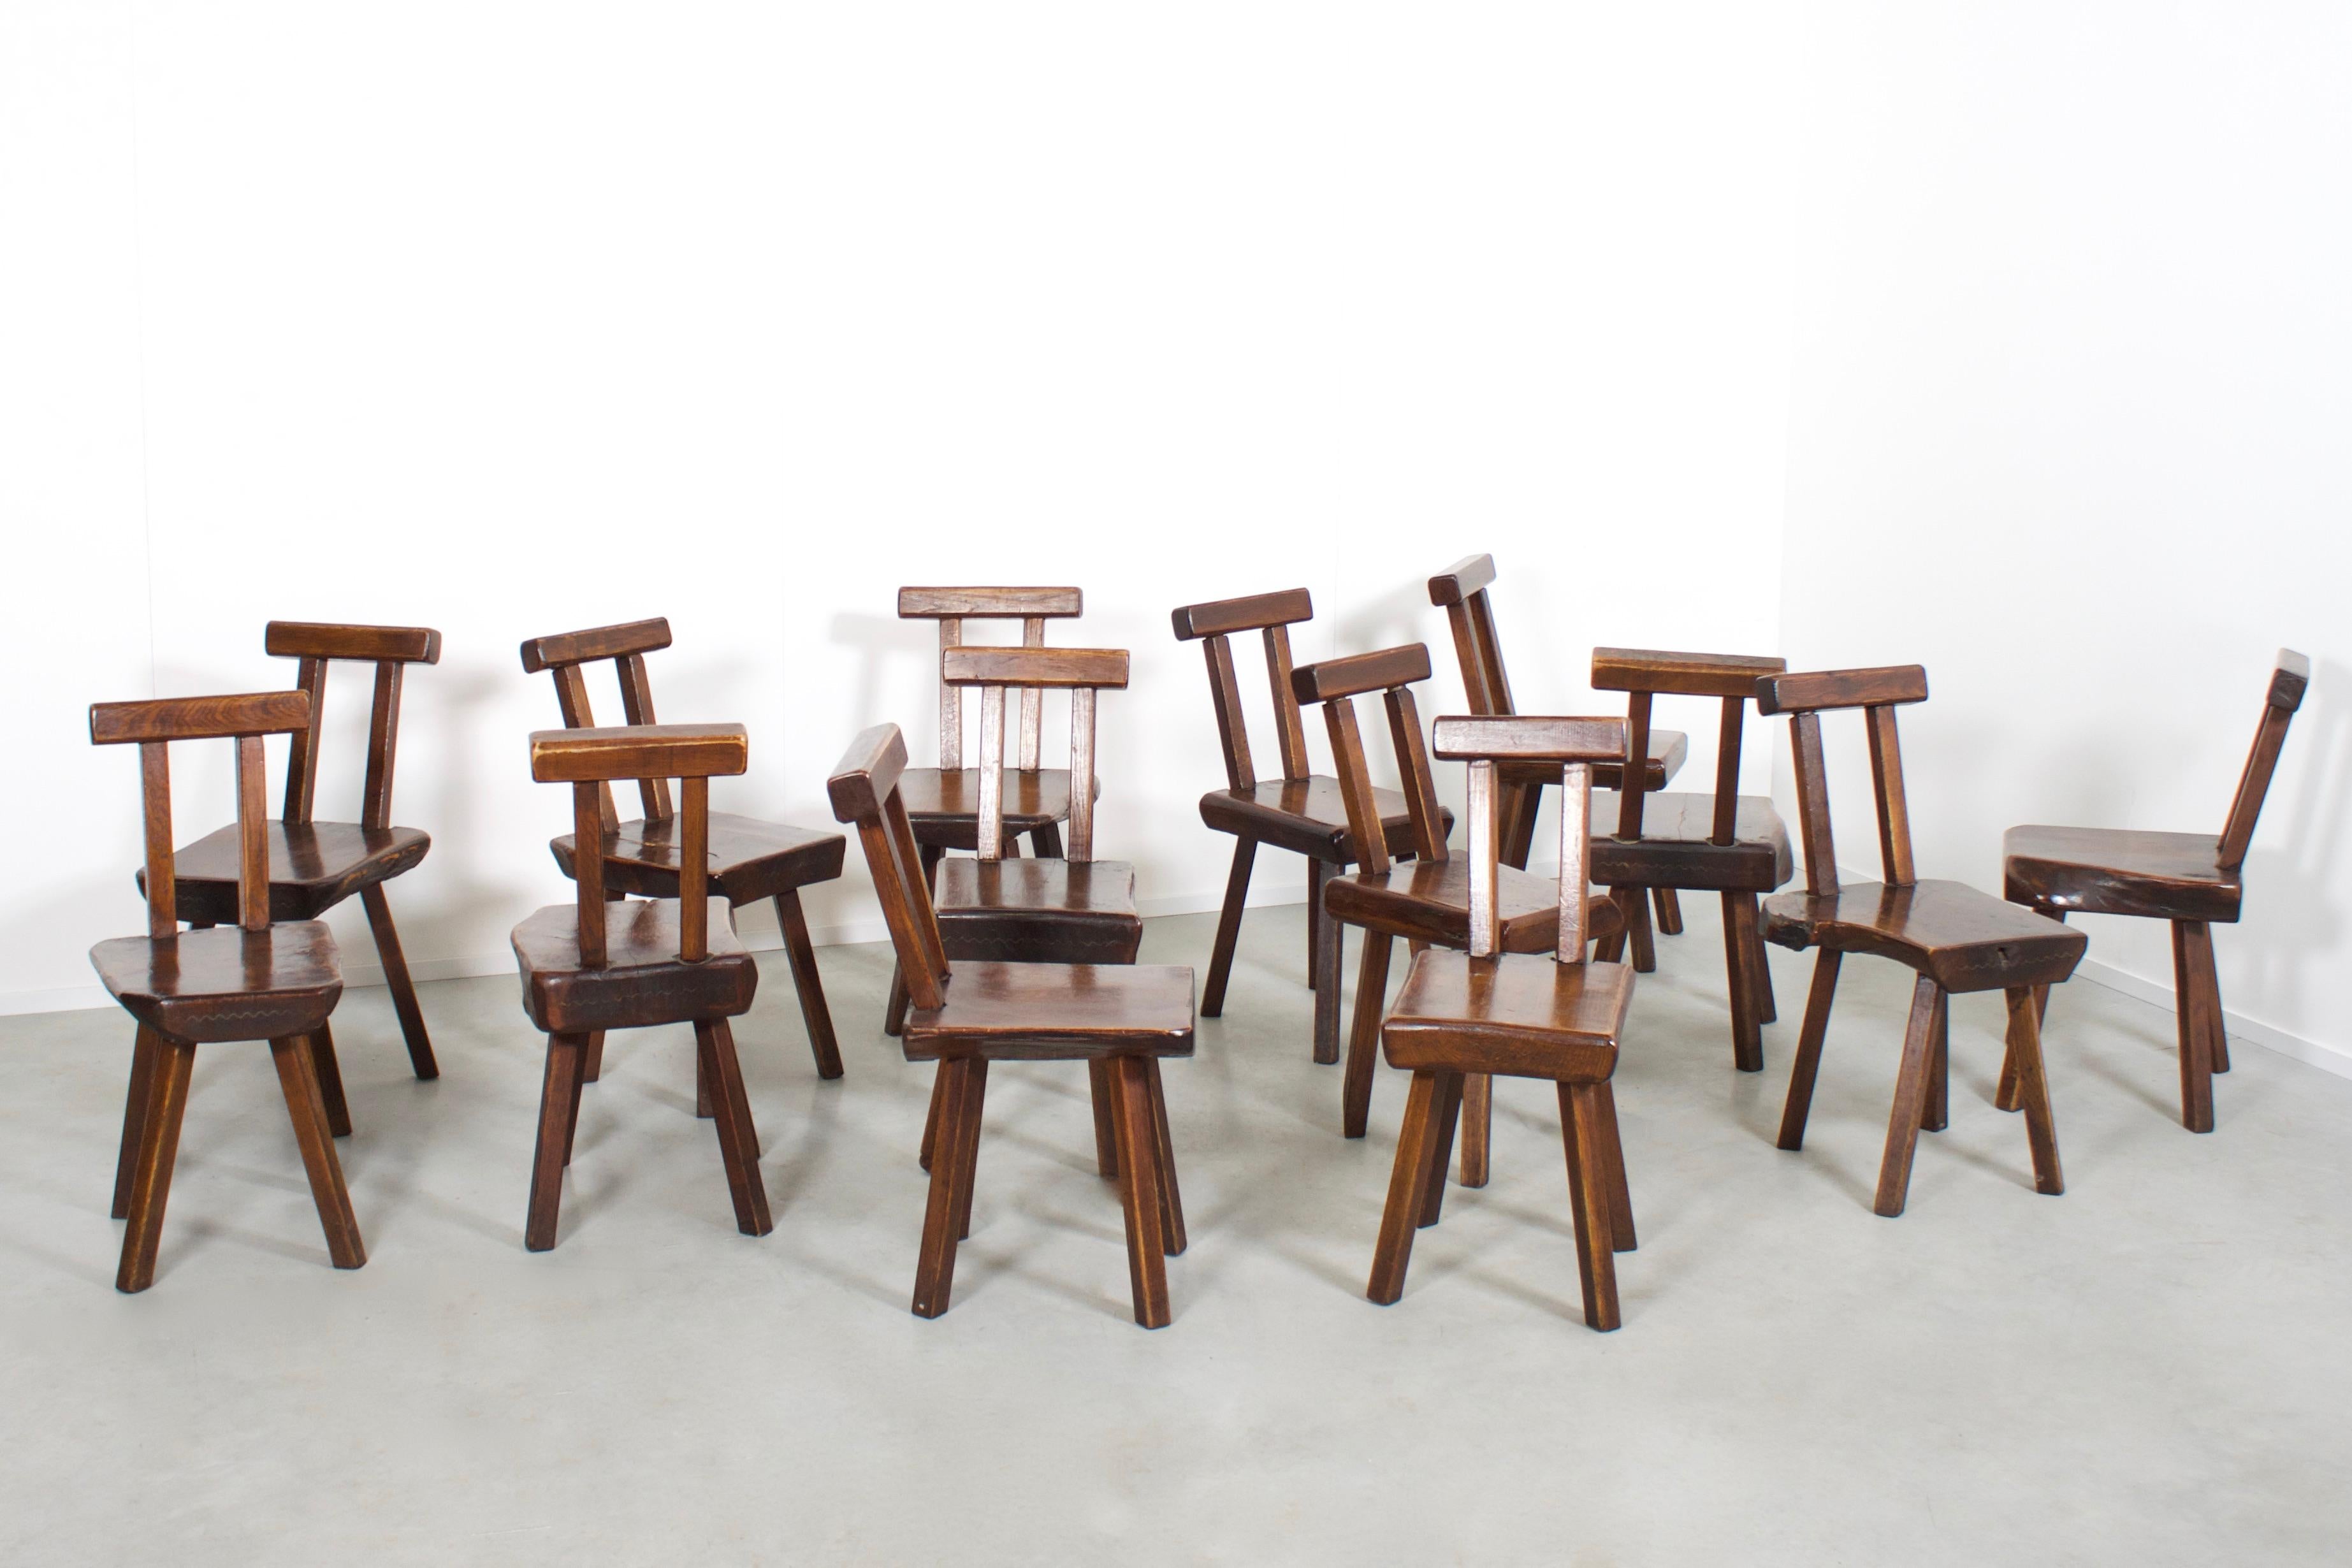 Large lot of sculptural Brutalist chairs in very good condition.

These chairs are produced by Mobichalet, Belgium in the 1950s 

15 available, price is for 1 chair

The chairs are handmade and are all slightly different in form which gives